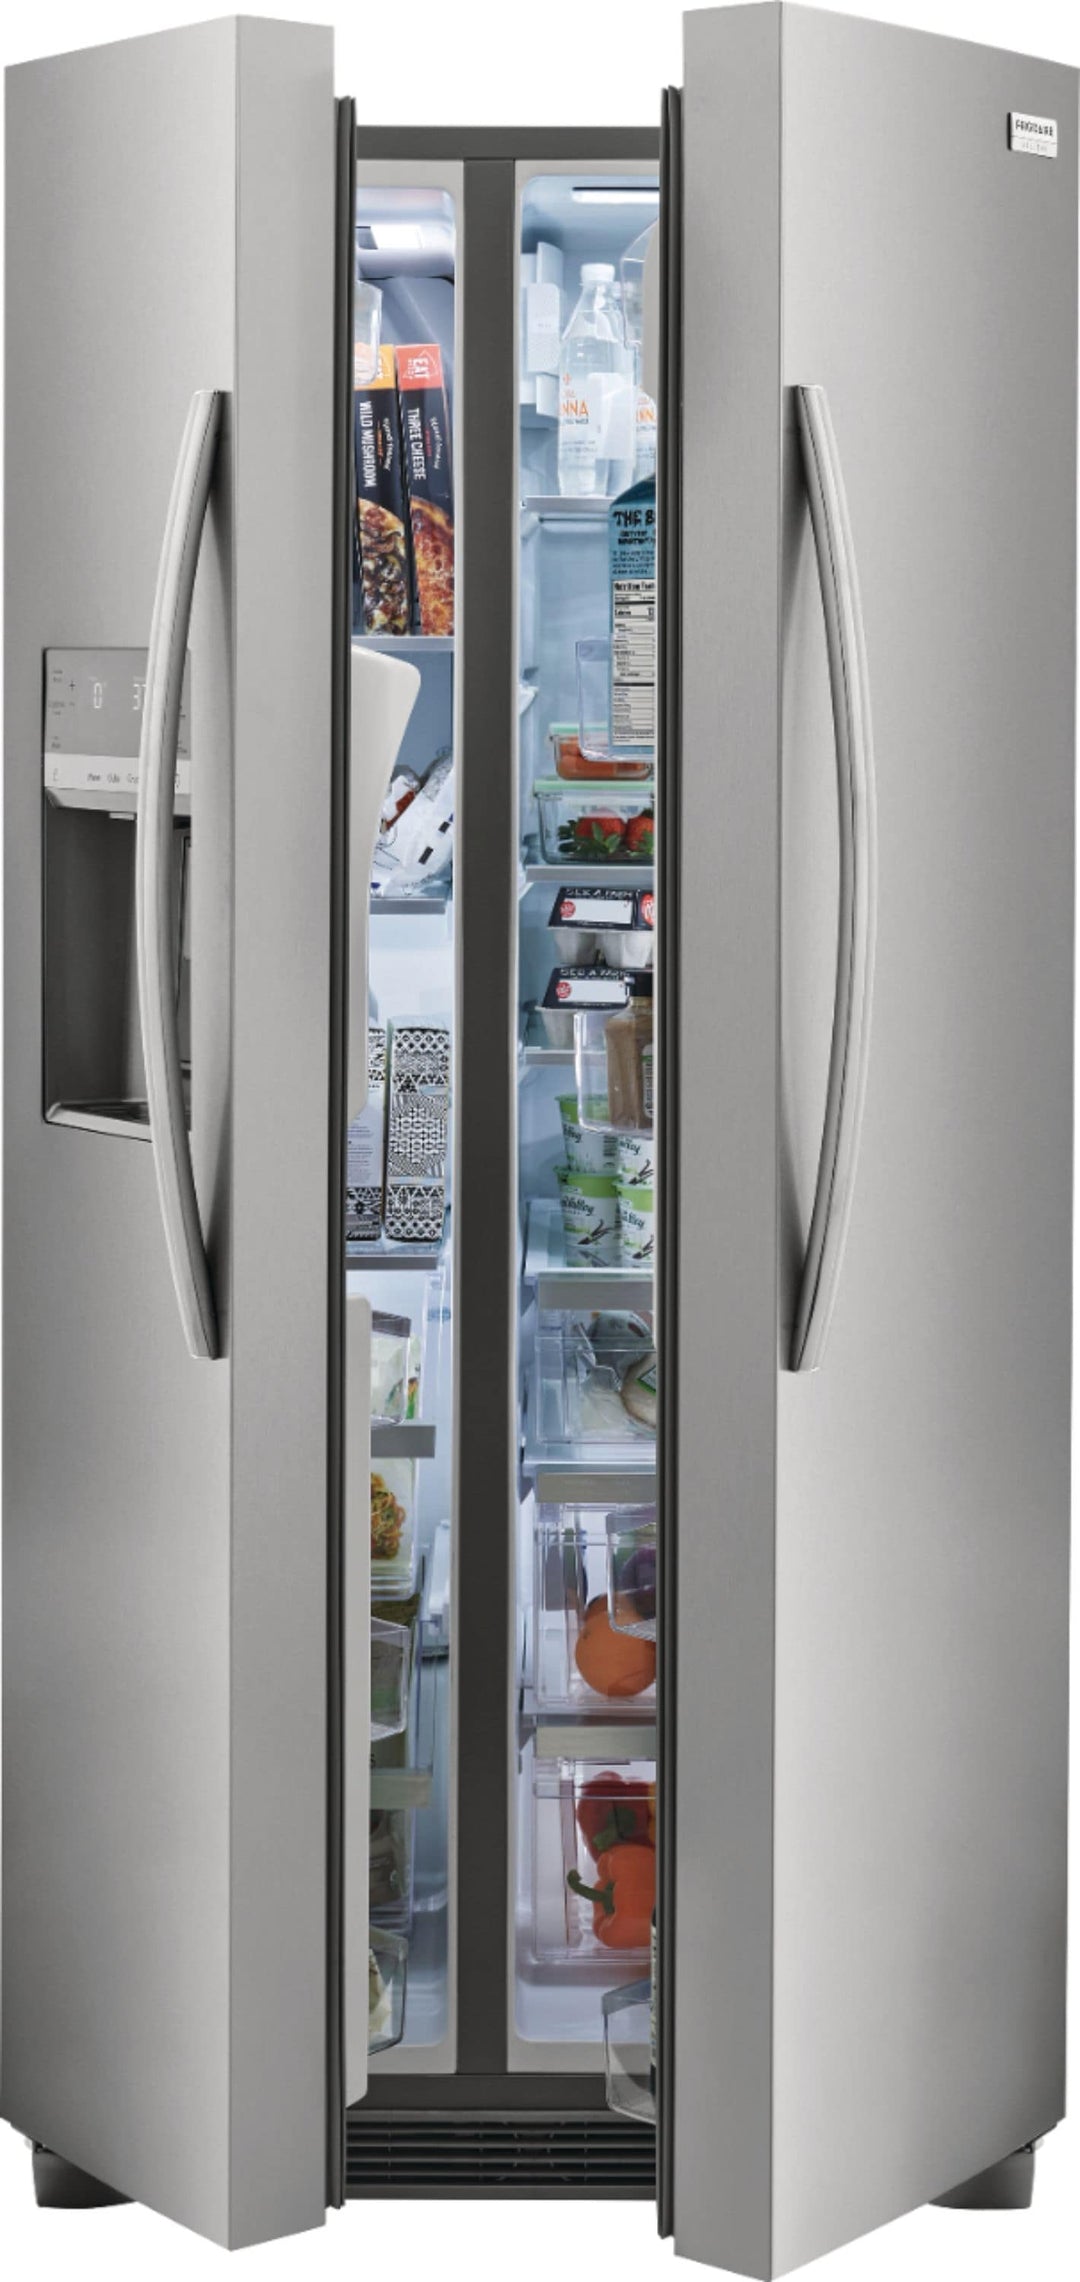 Frigidaire - Gallery 22.3 Cu. Ft. Side-by-Side Counter-Depth Refrigerator - Stainless steel_2